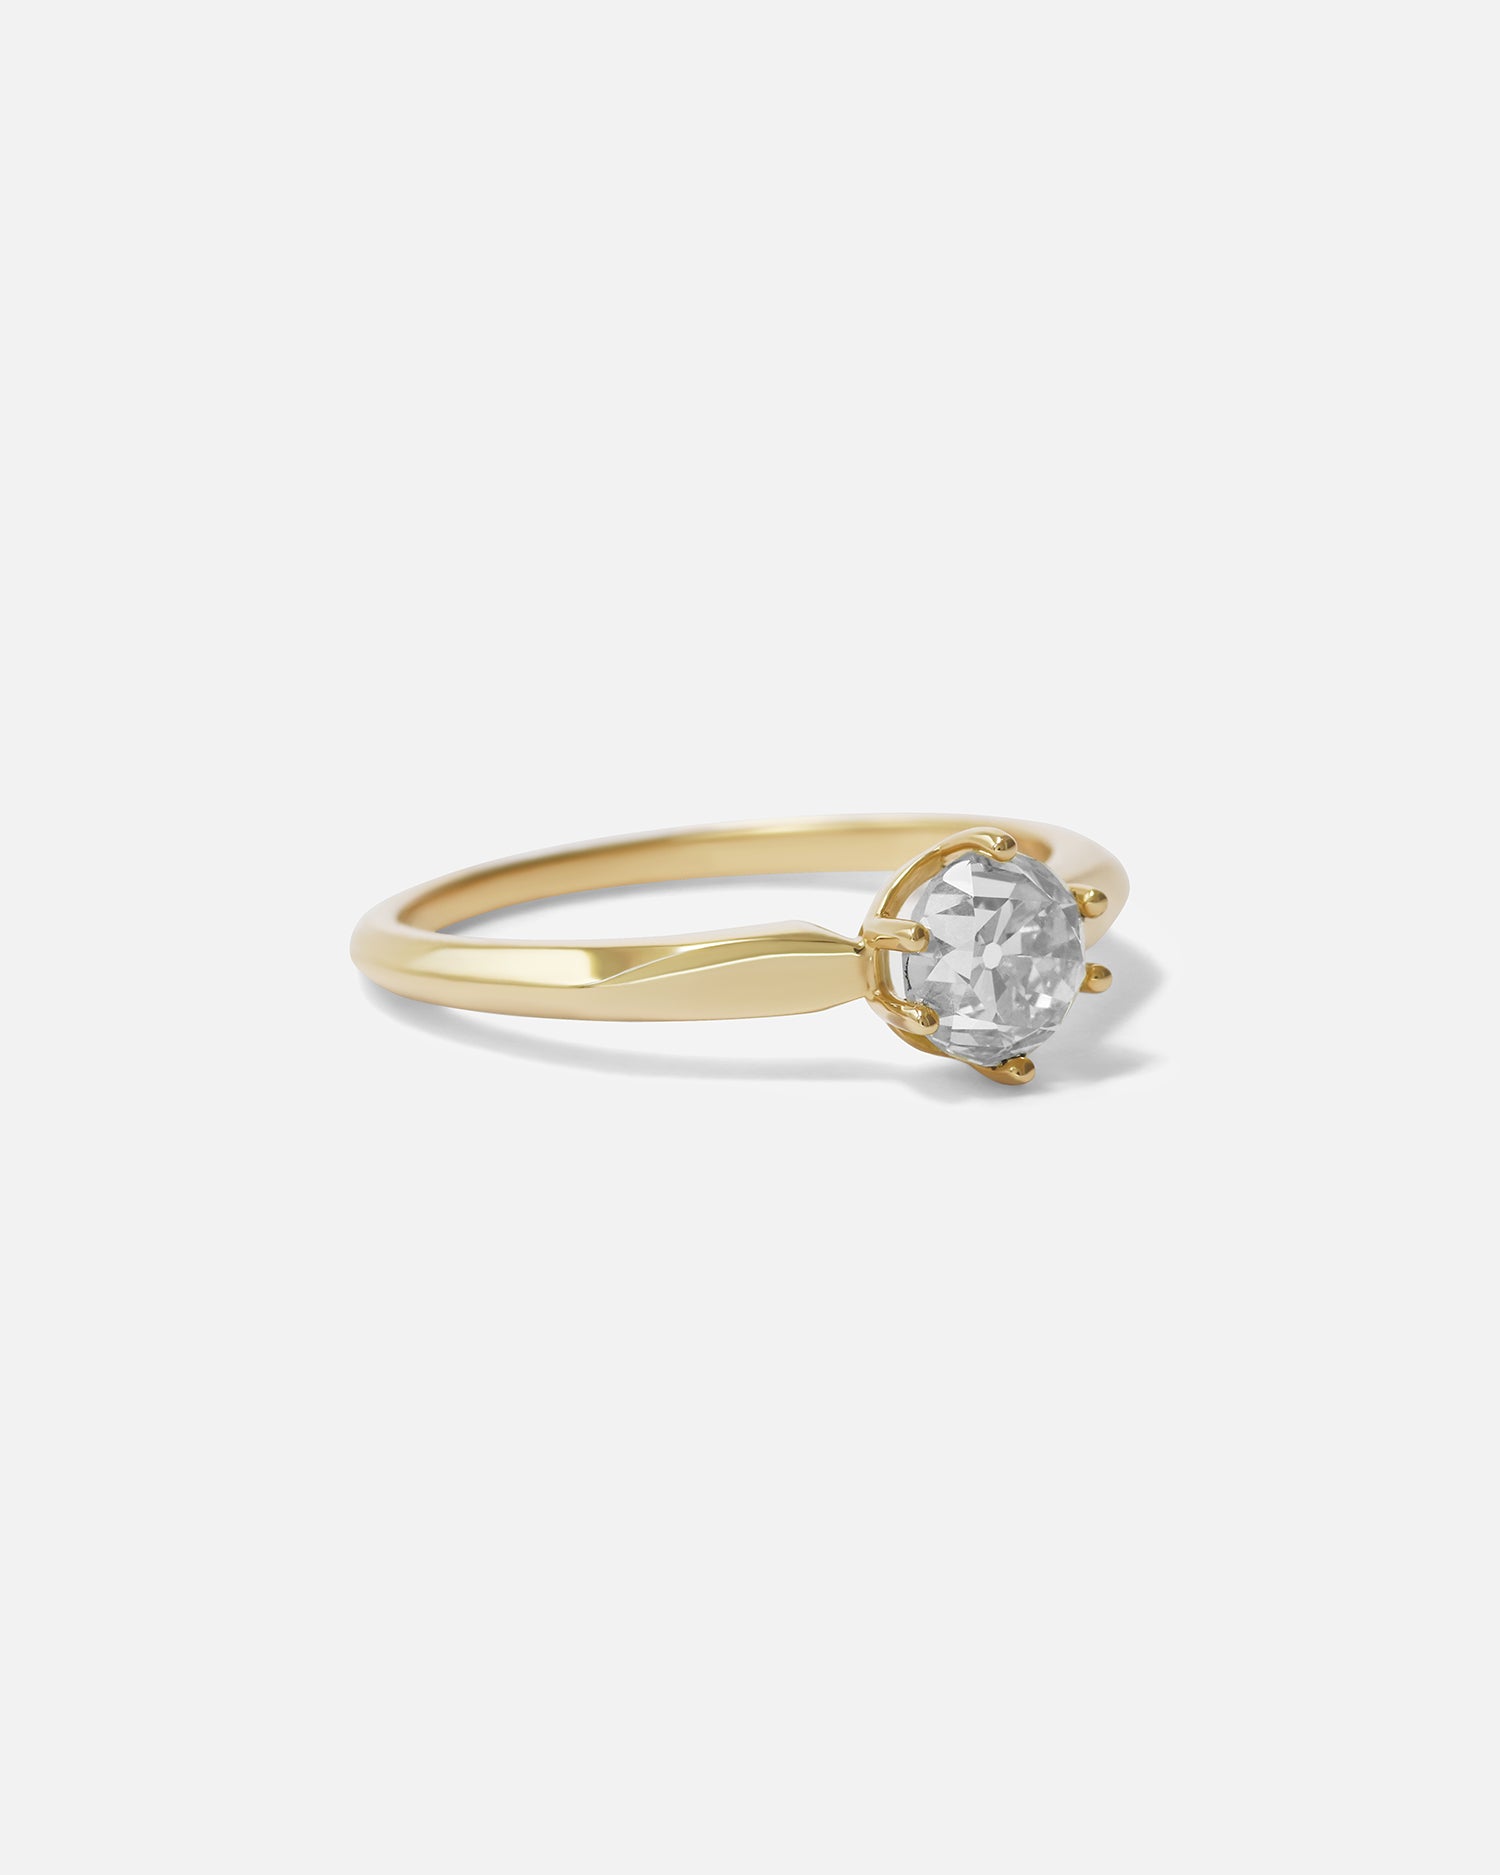 Leigh / Old Euro Diamond Ring By Casual Seance